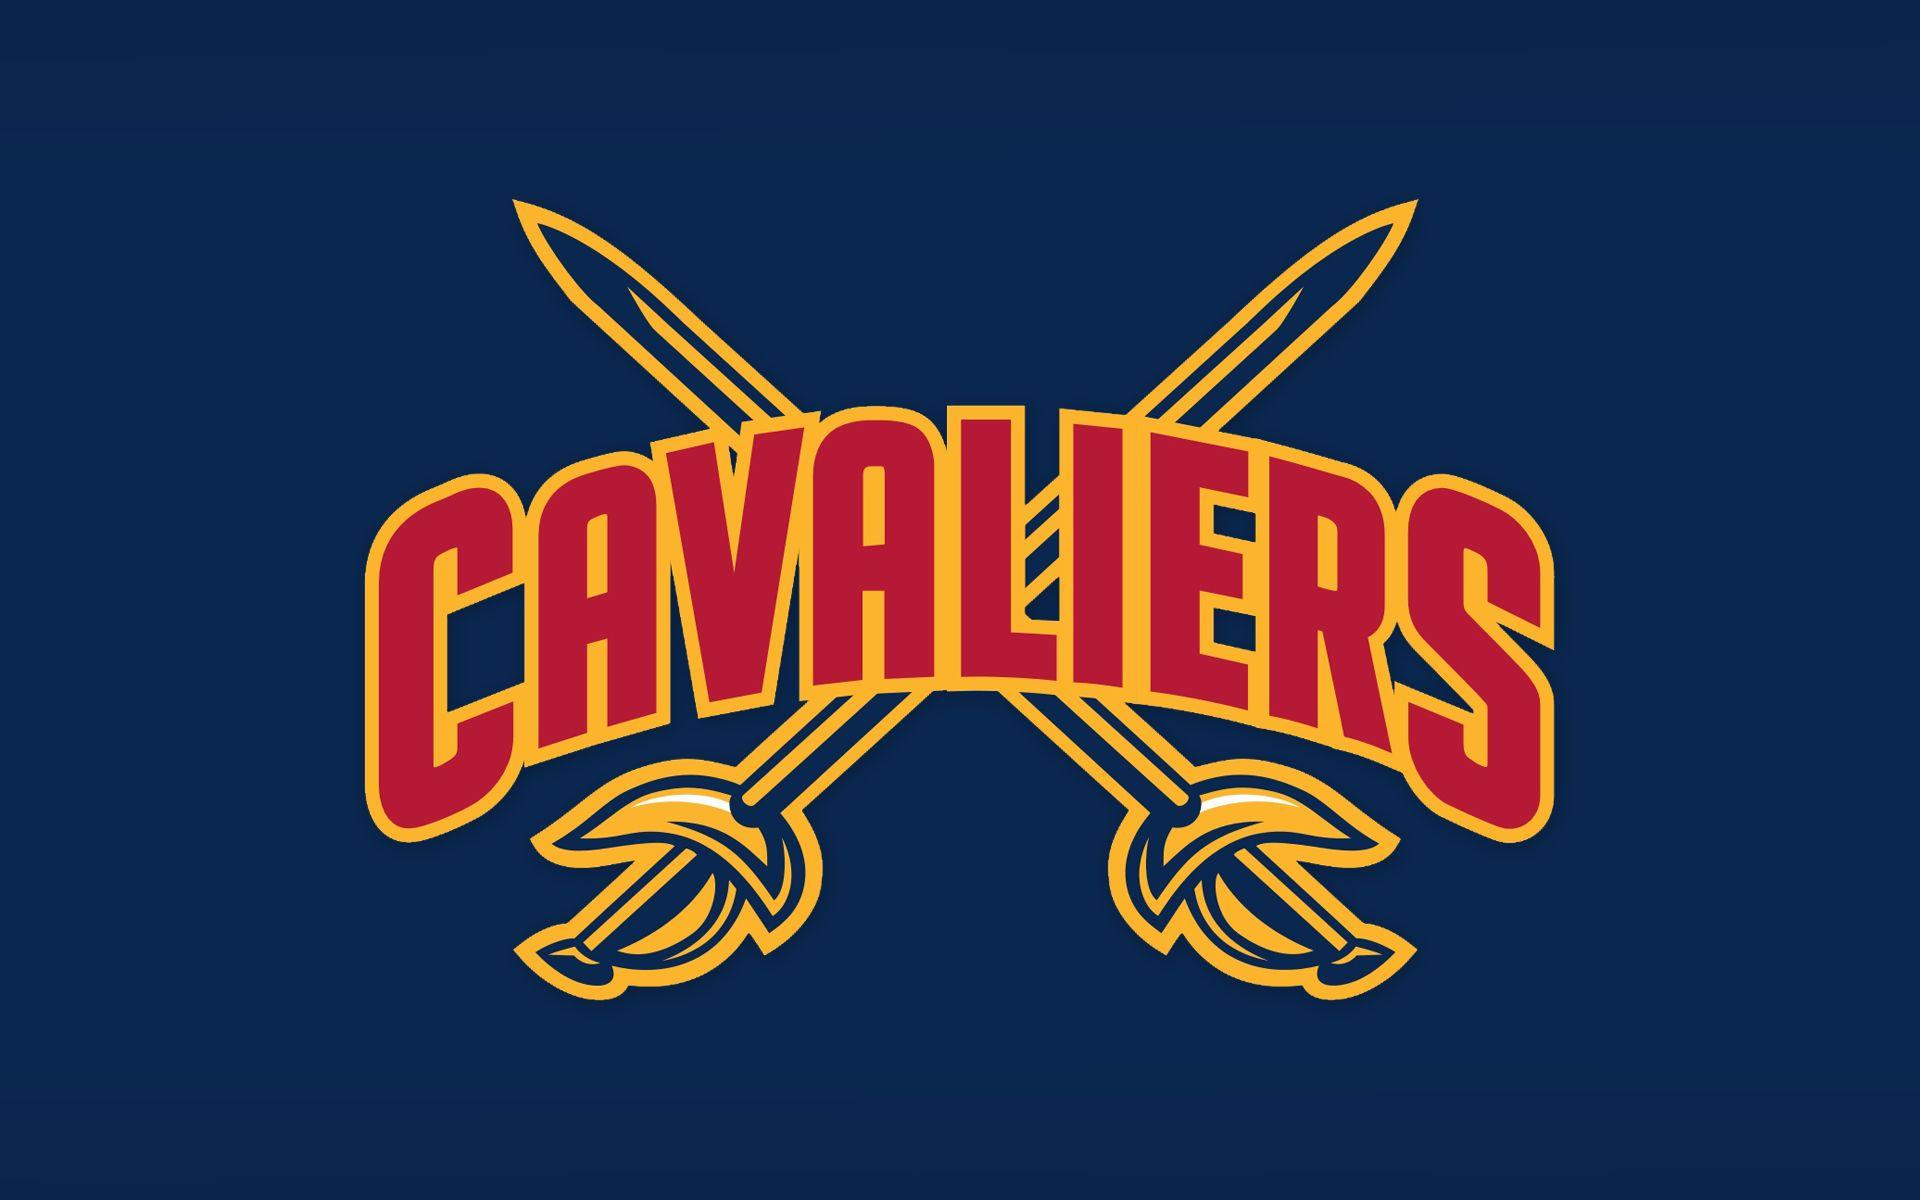 Cleveland Cavaliers Wallpaper 17957 1920x1200 px